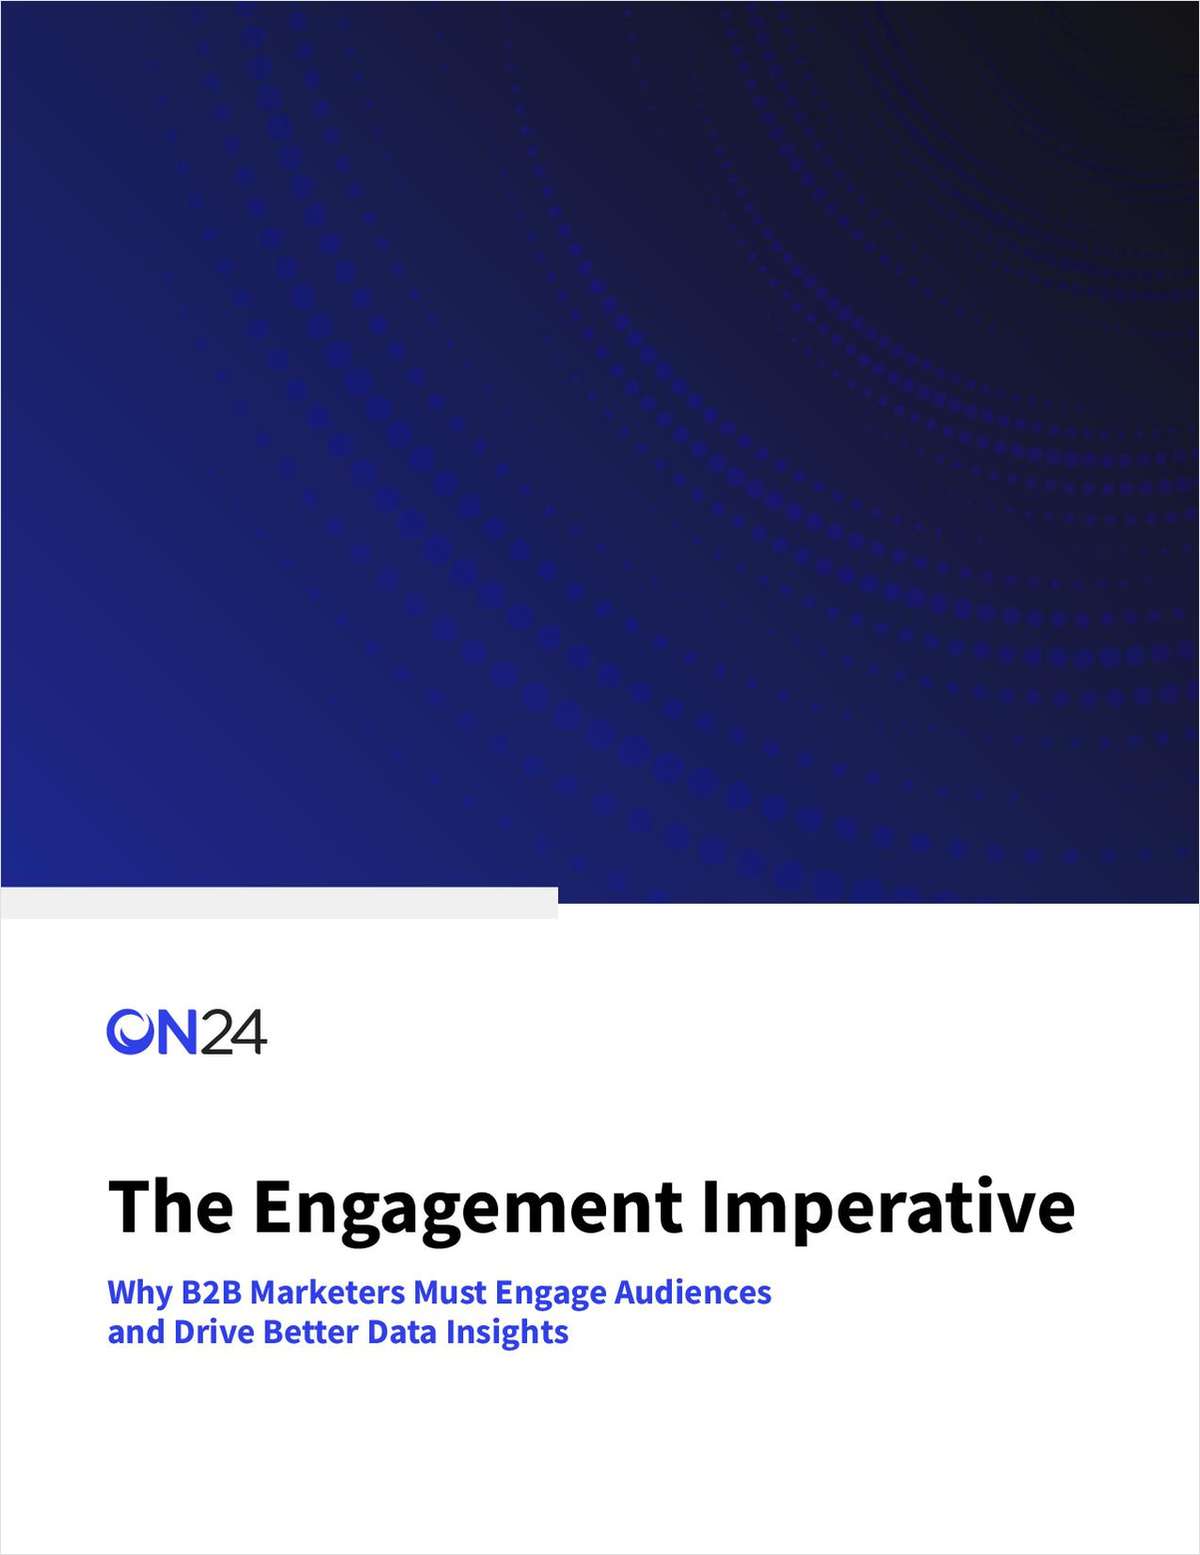 The Engagement Imperative